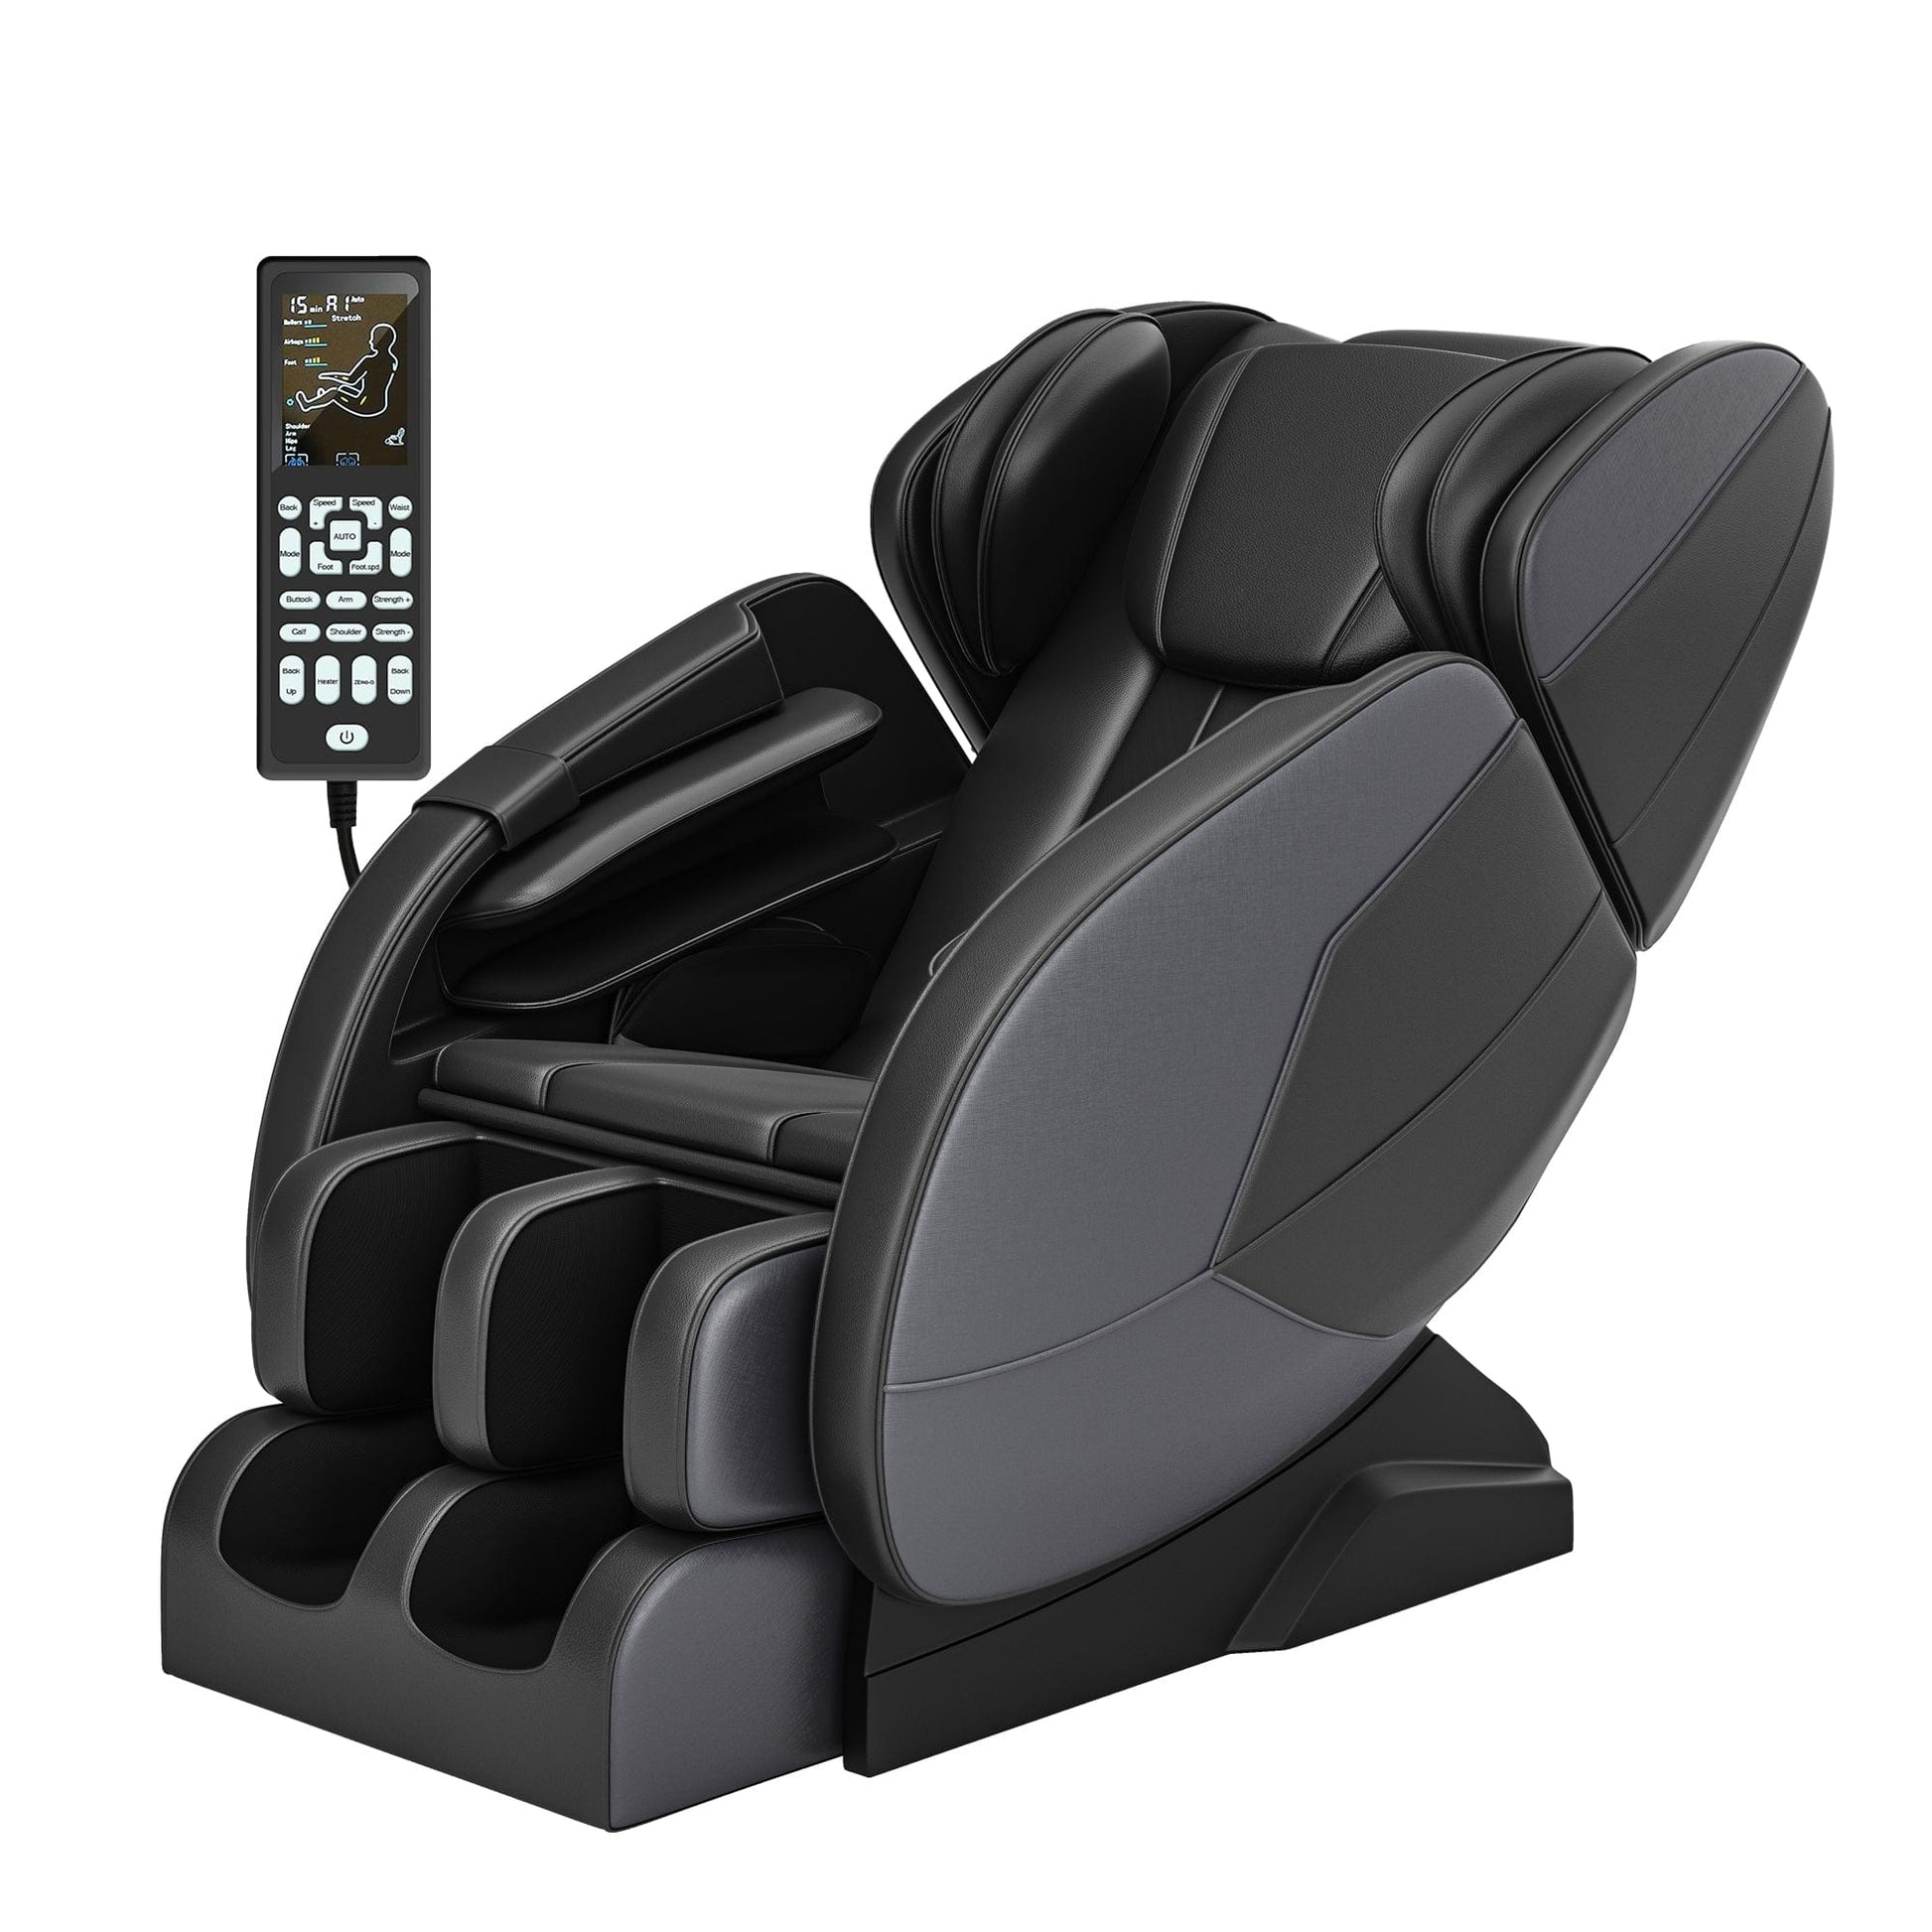 Real Relax Massage Chair MM450 Massage Chair black A